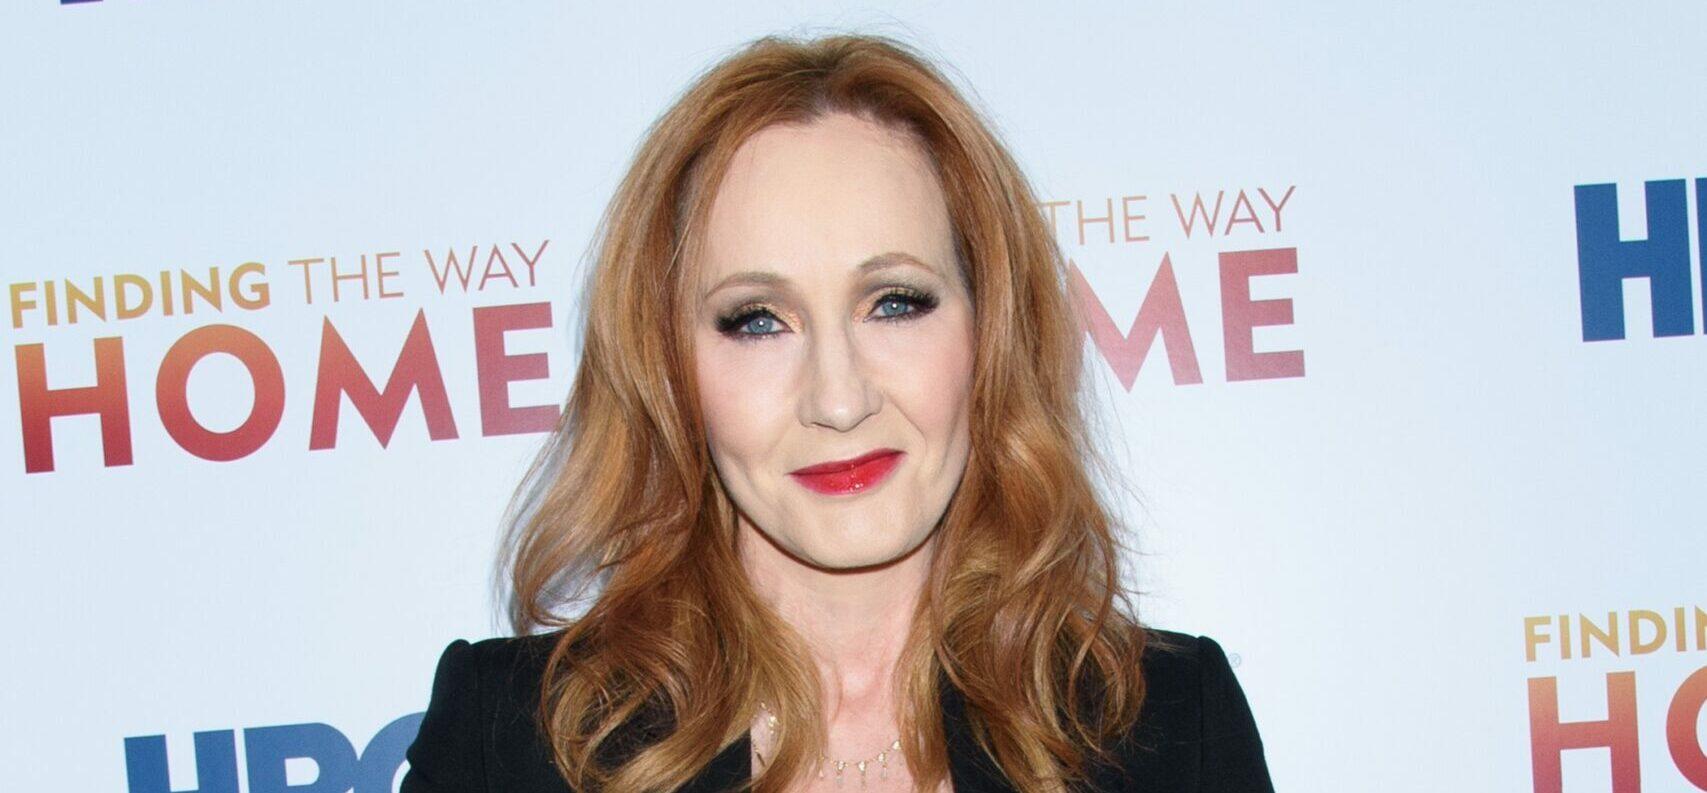 J.K. Rowling Fantasizes Going To Jail If She Is ‘Forced’ To Use Correct Pronouns